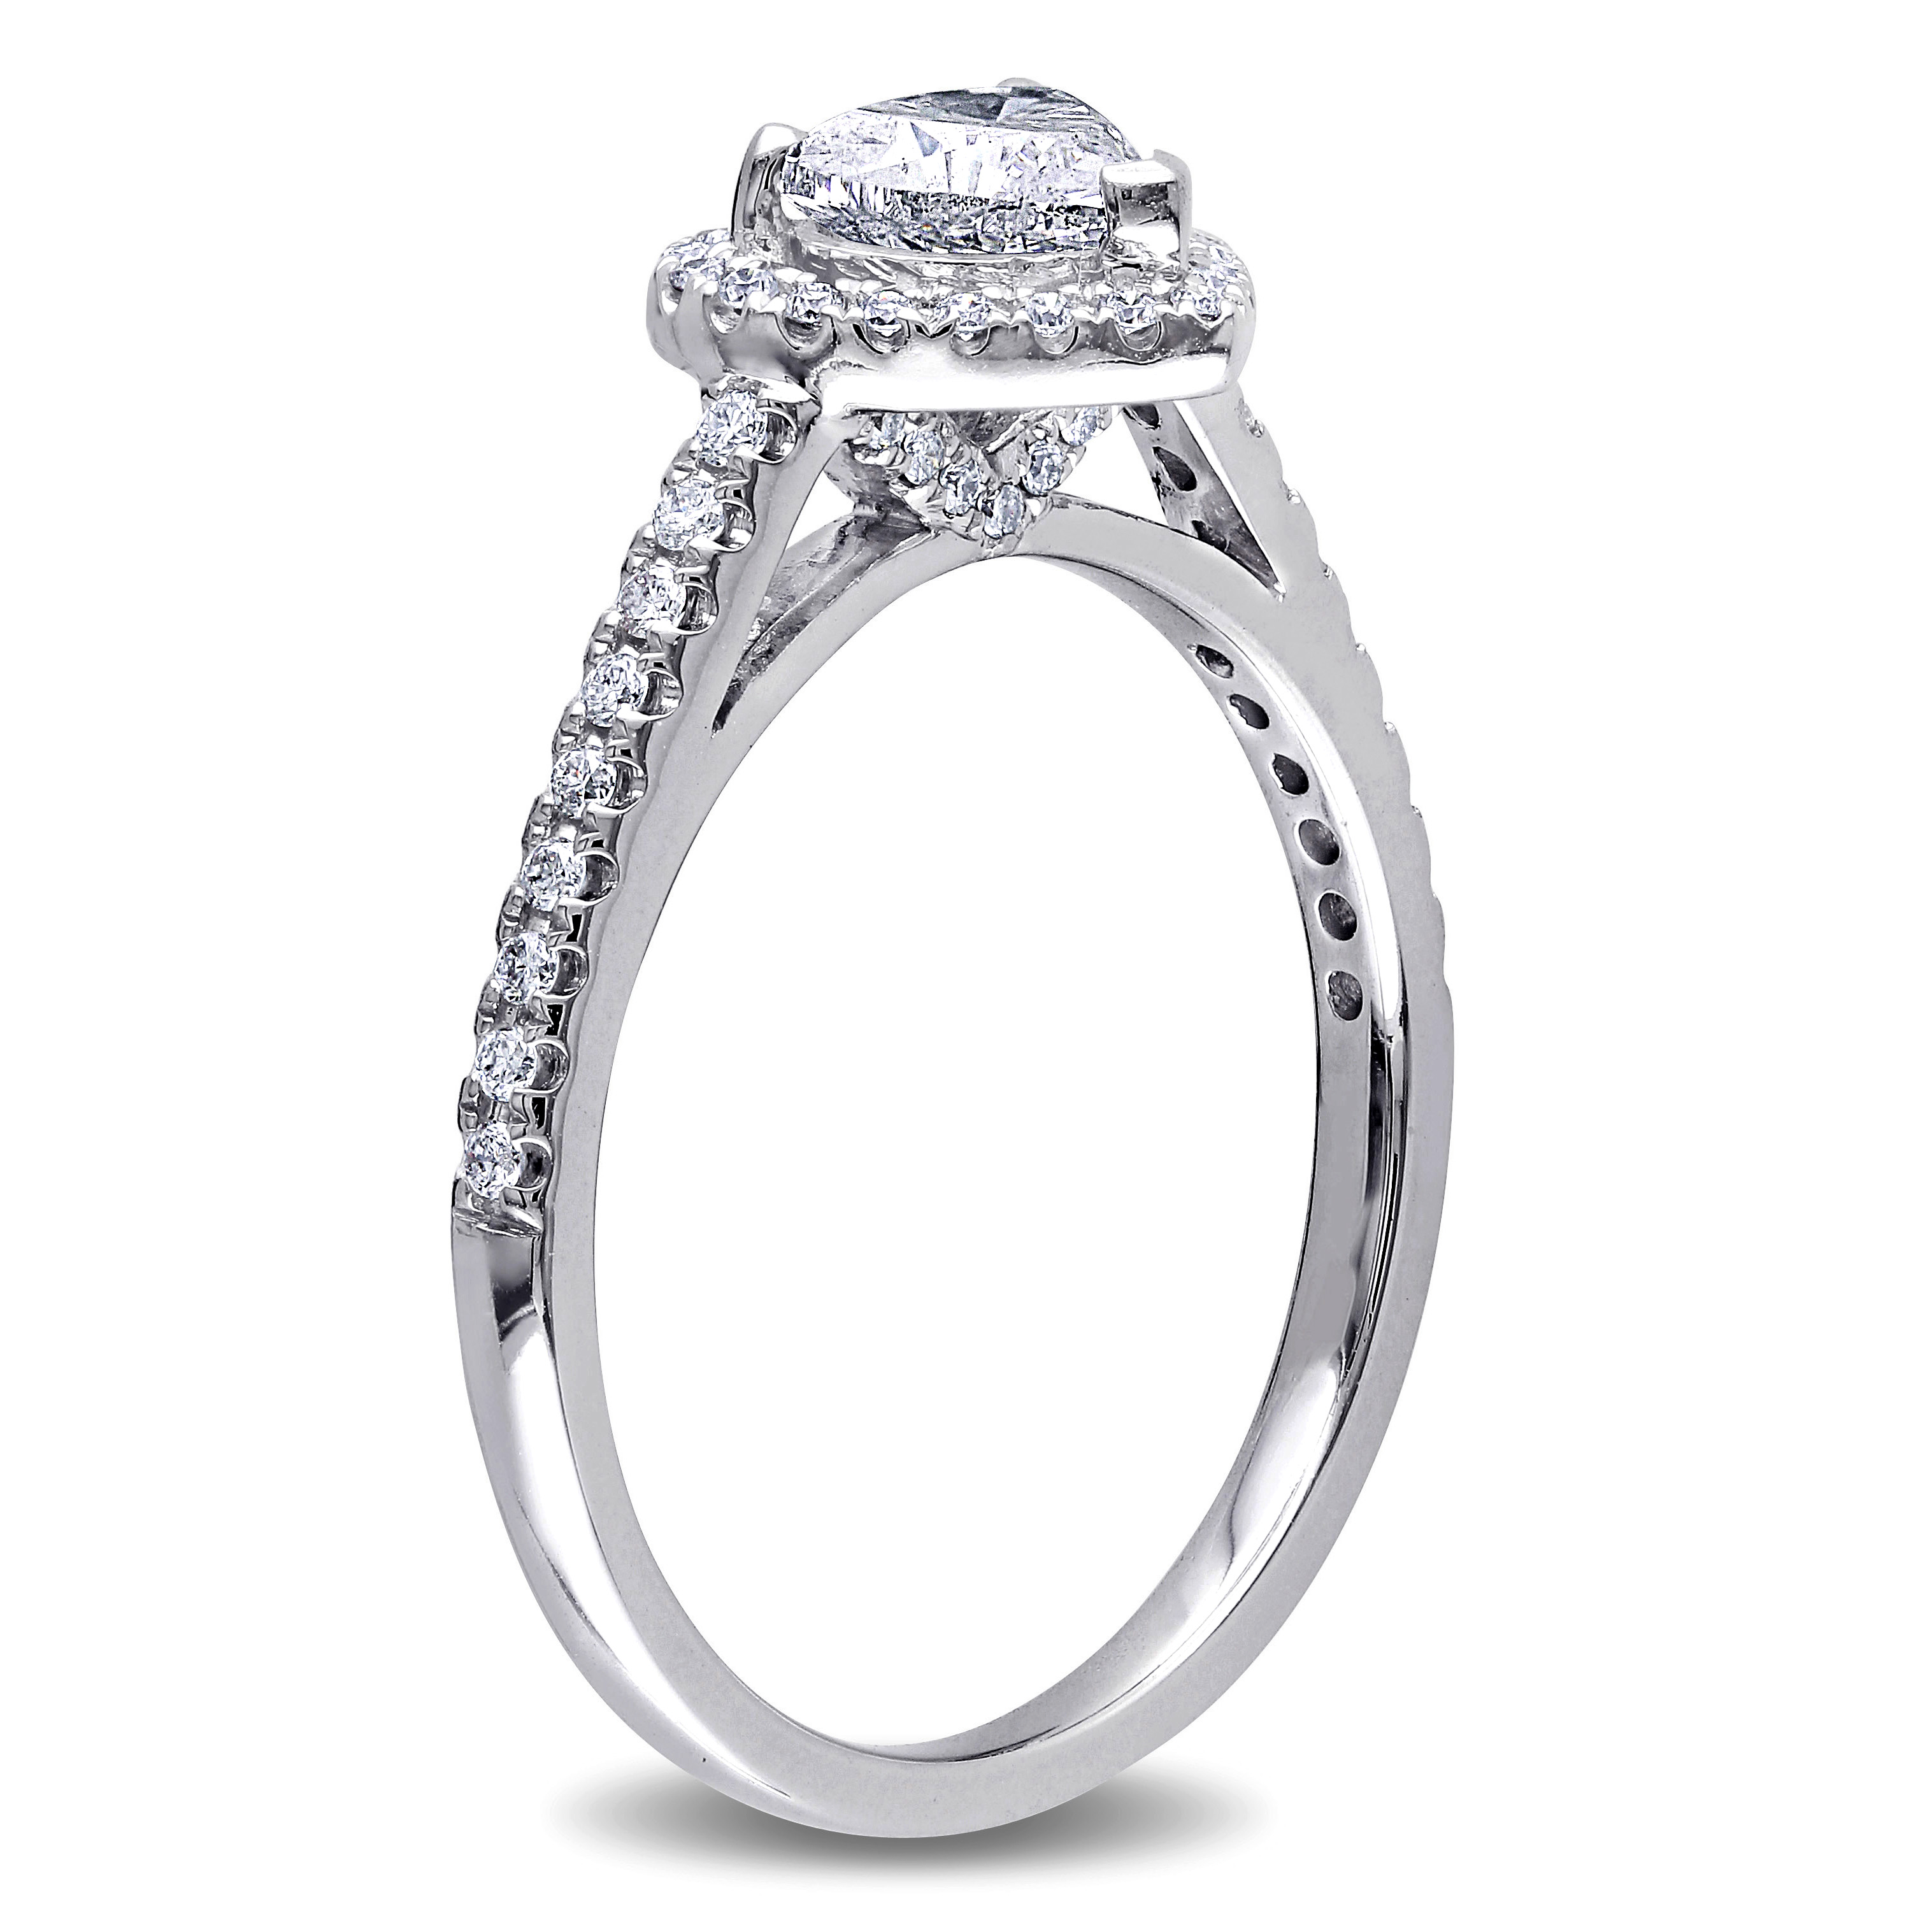 1 CT TW Halo Heart Diamond Engagement Ring in 14k White Gold